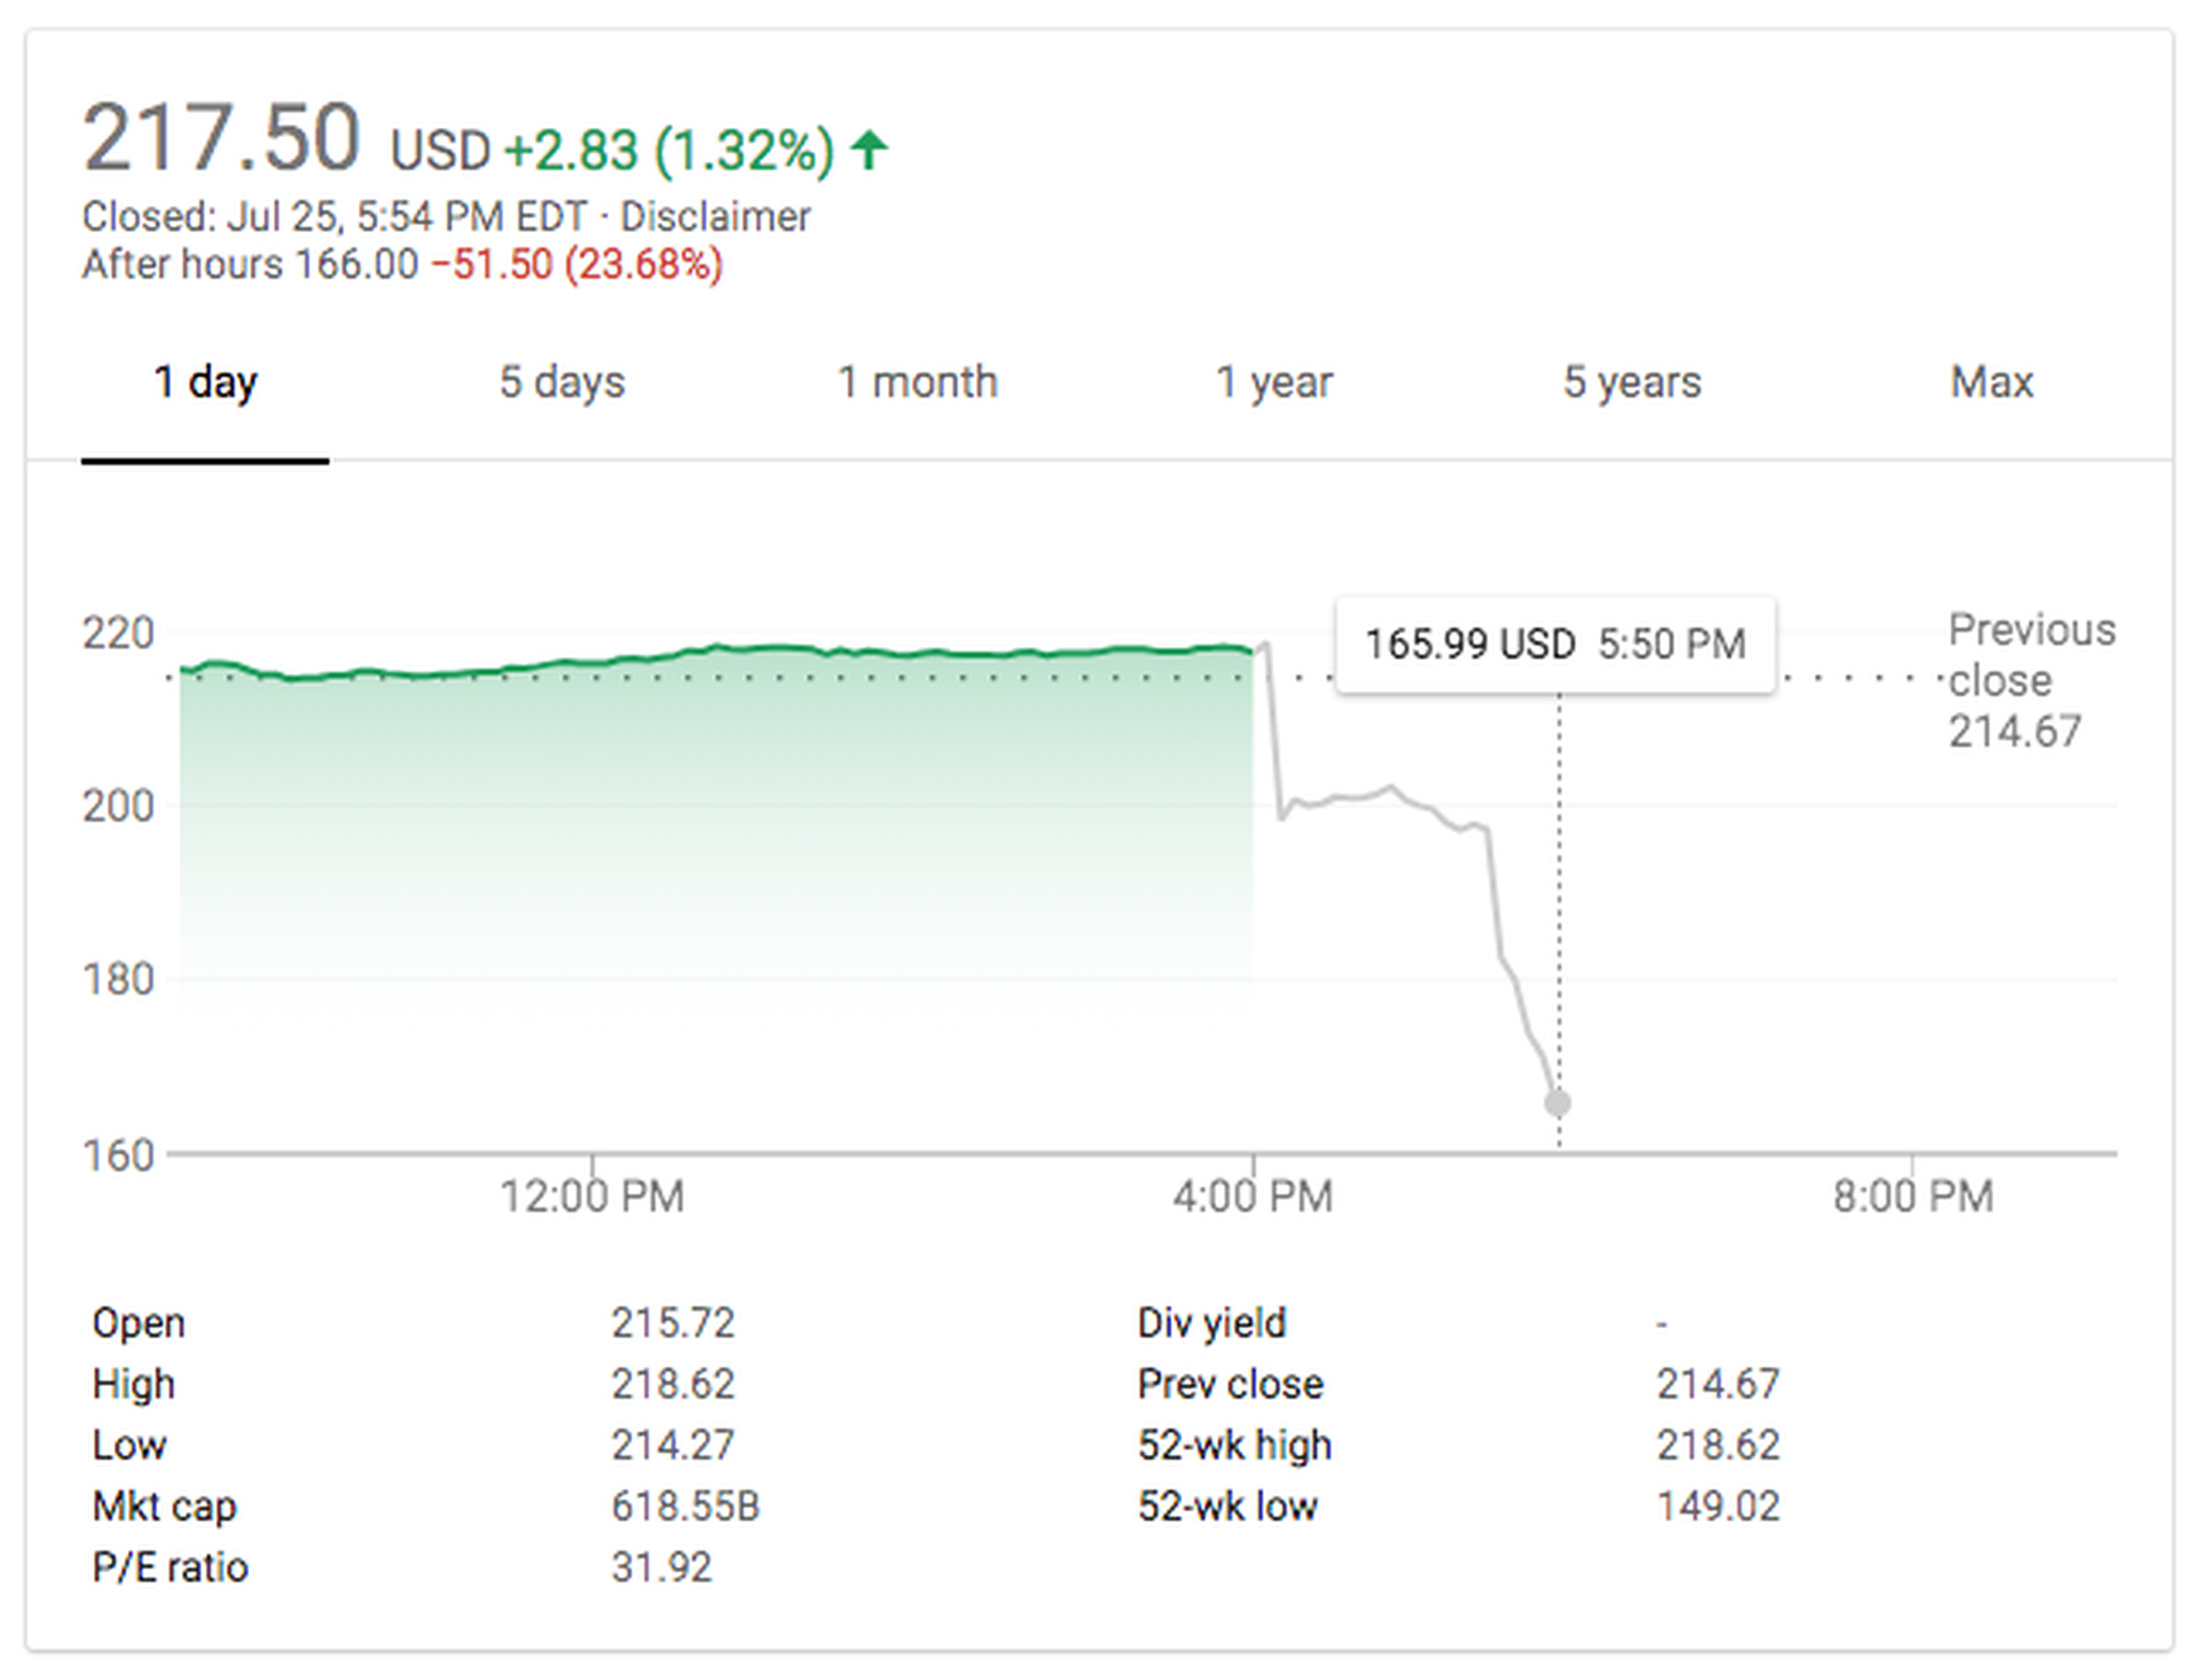 Facebook’s stock price declined sharply after hours Wednesday